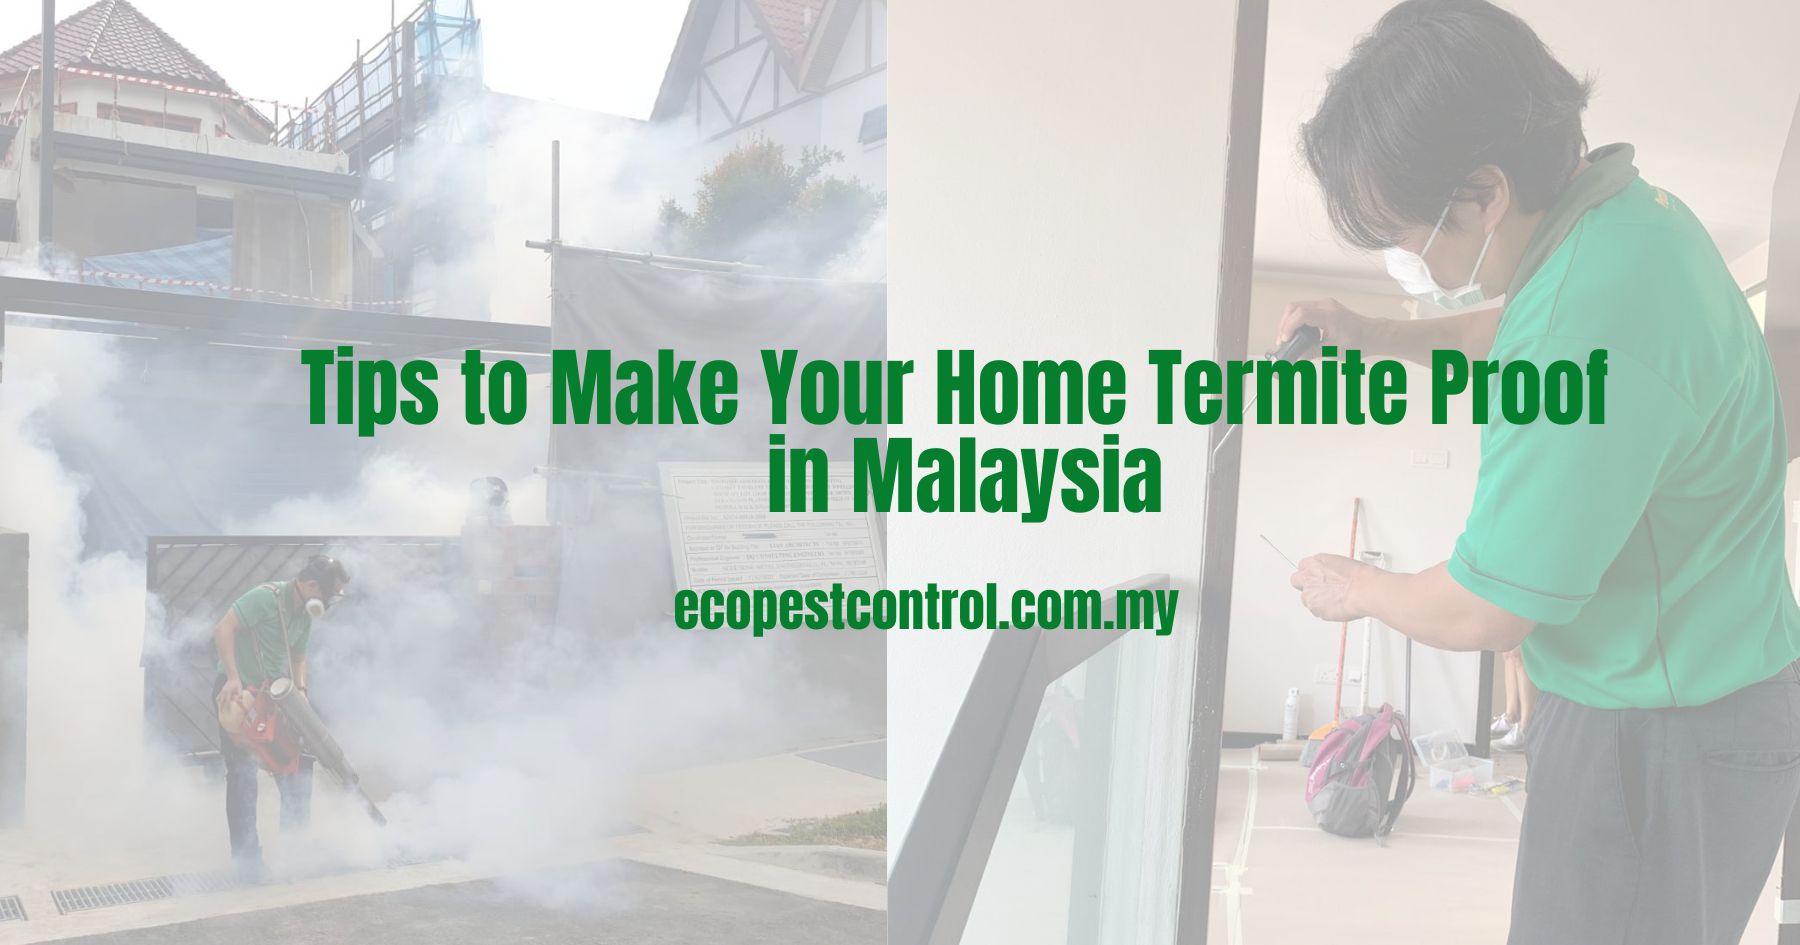 Tips to Make Your Home Termite Proof in Malaysia